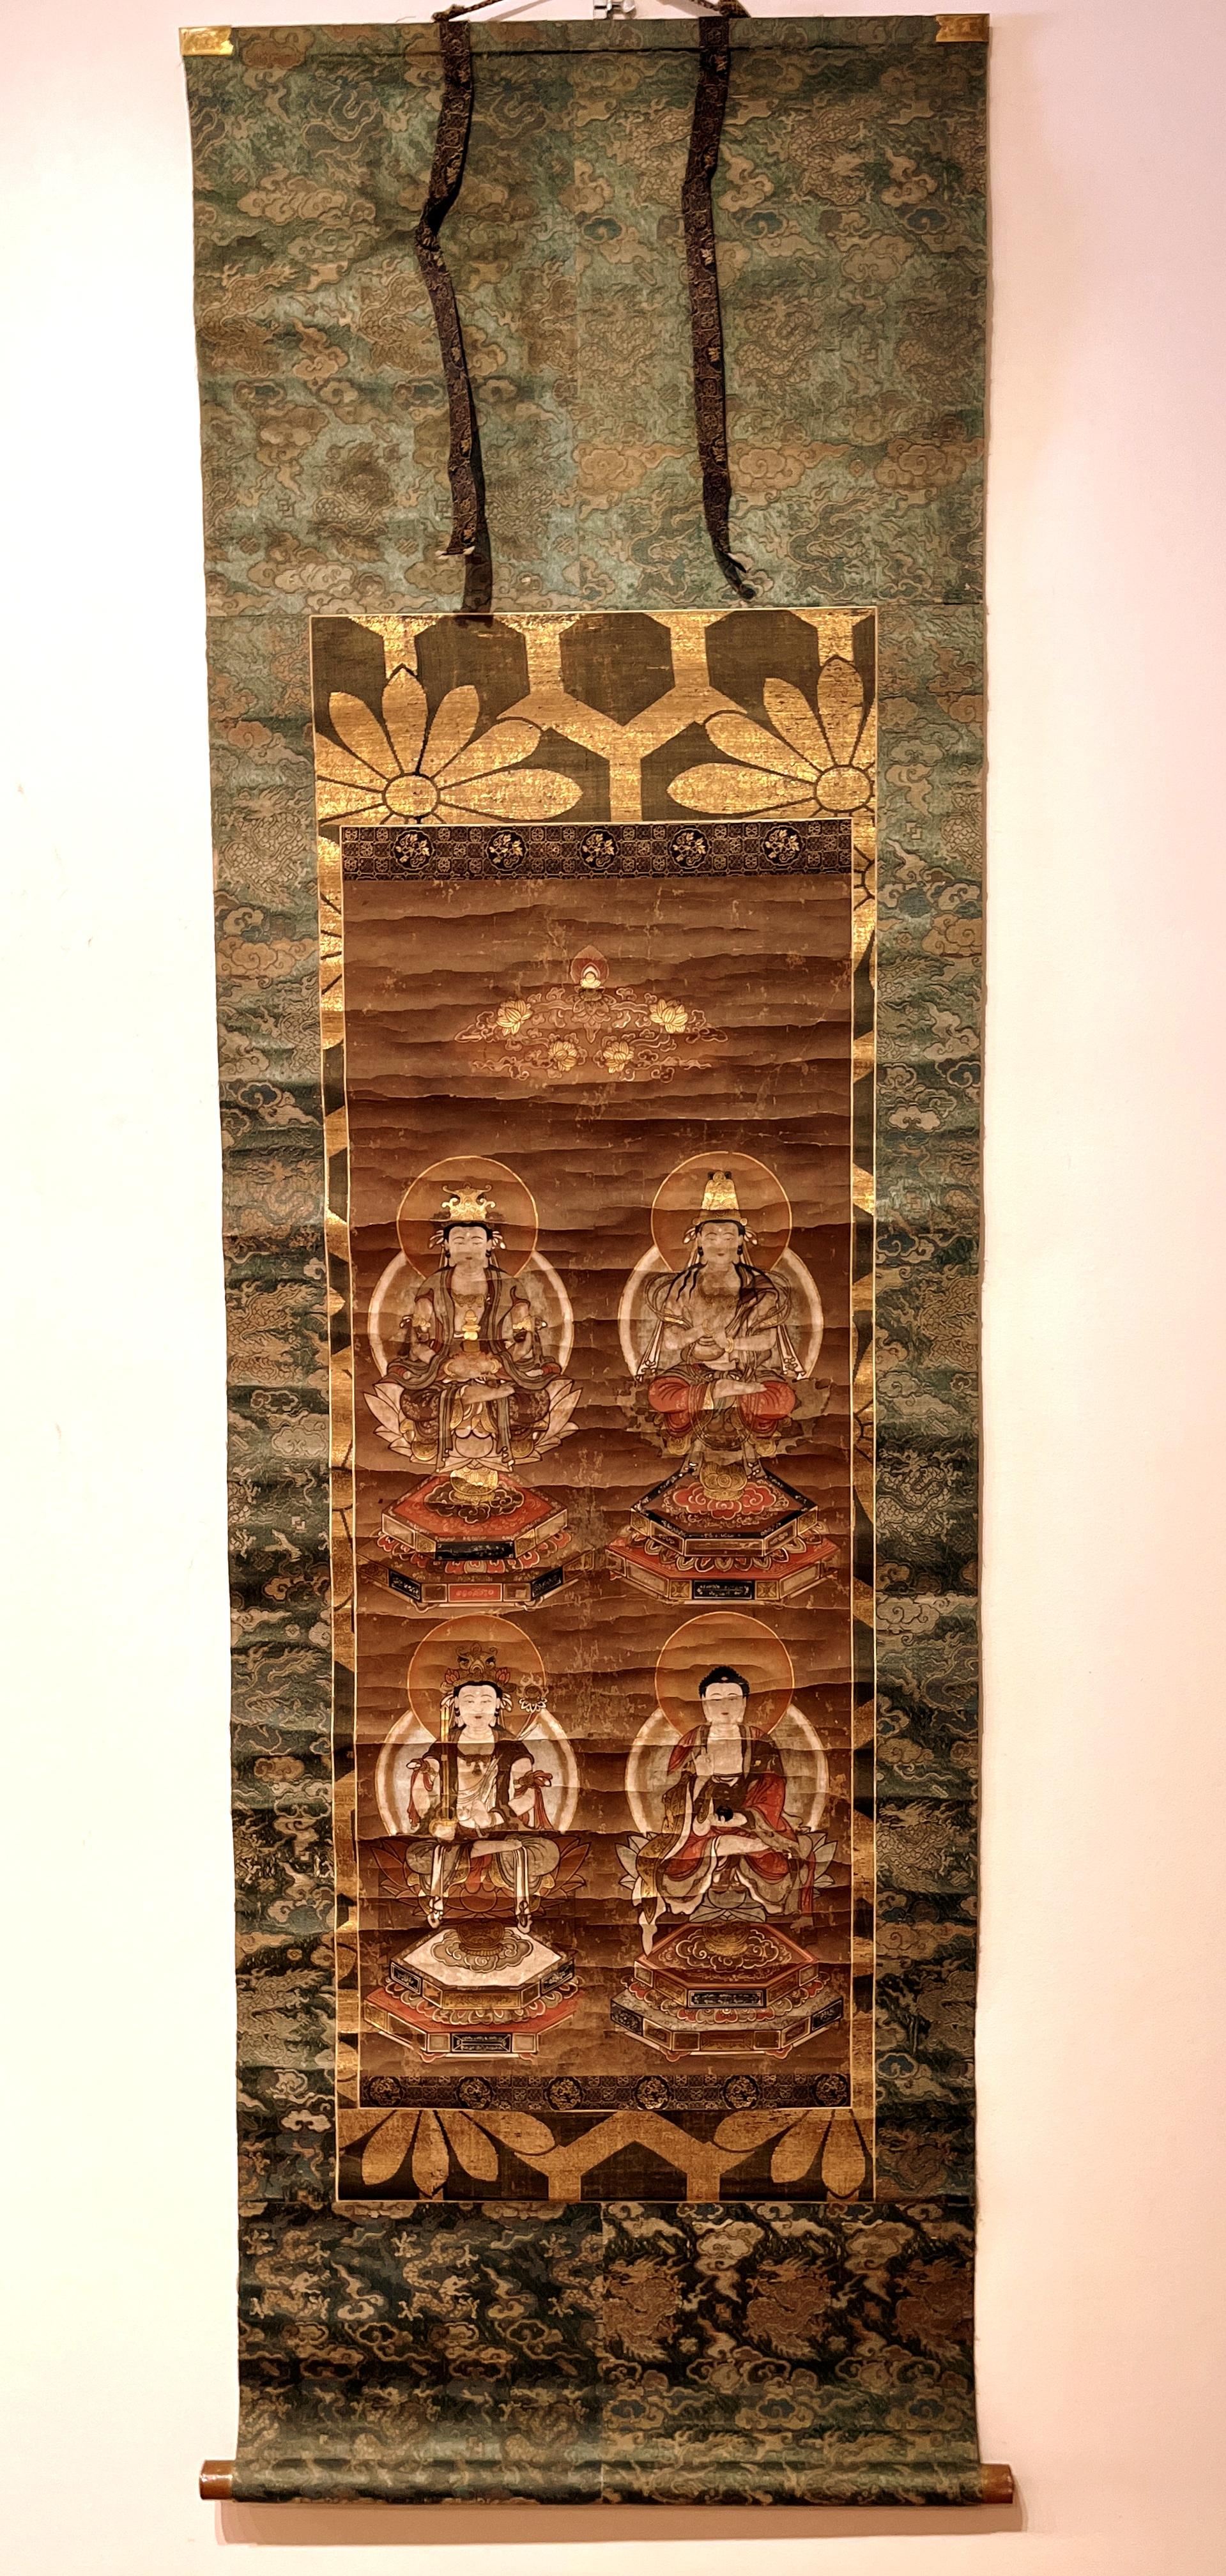 Japanese Buddhist Painting , Hanging Scroll Painting
Depicted Amituofo and Budhisattva in the painting sitting on the lotus crown seats. Beautiful and finely outside mounted brocades. 
Overall size:  70